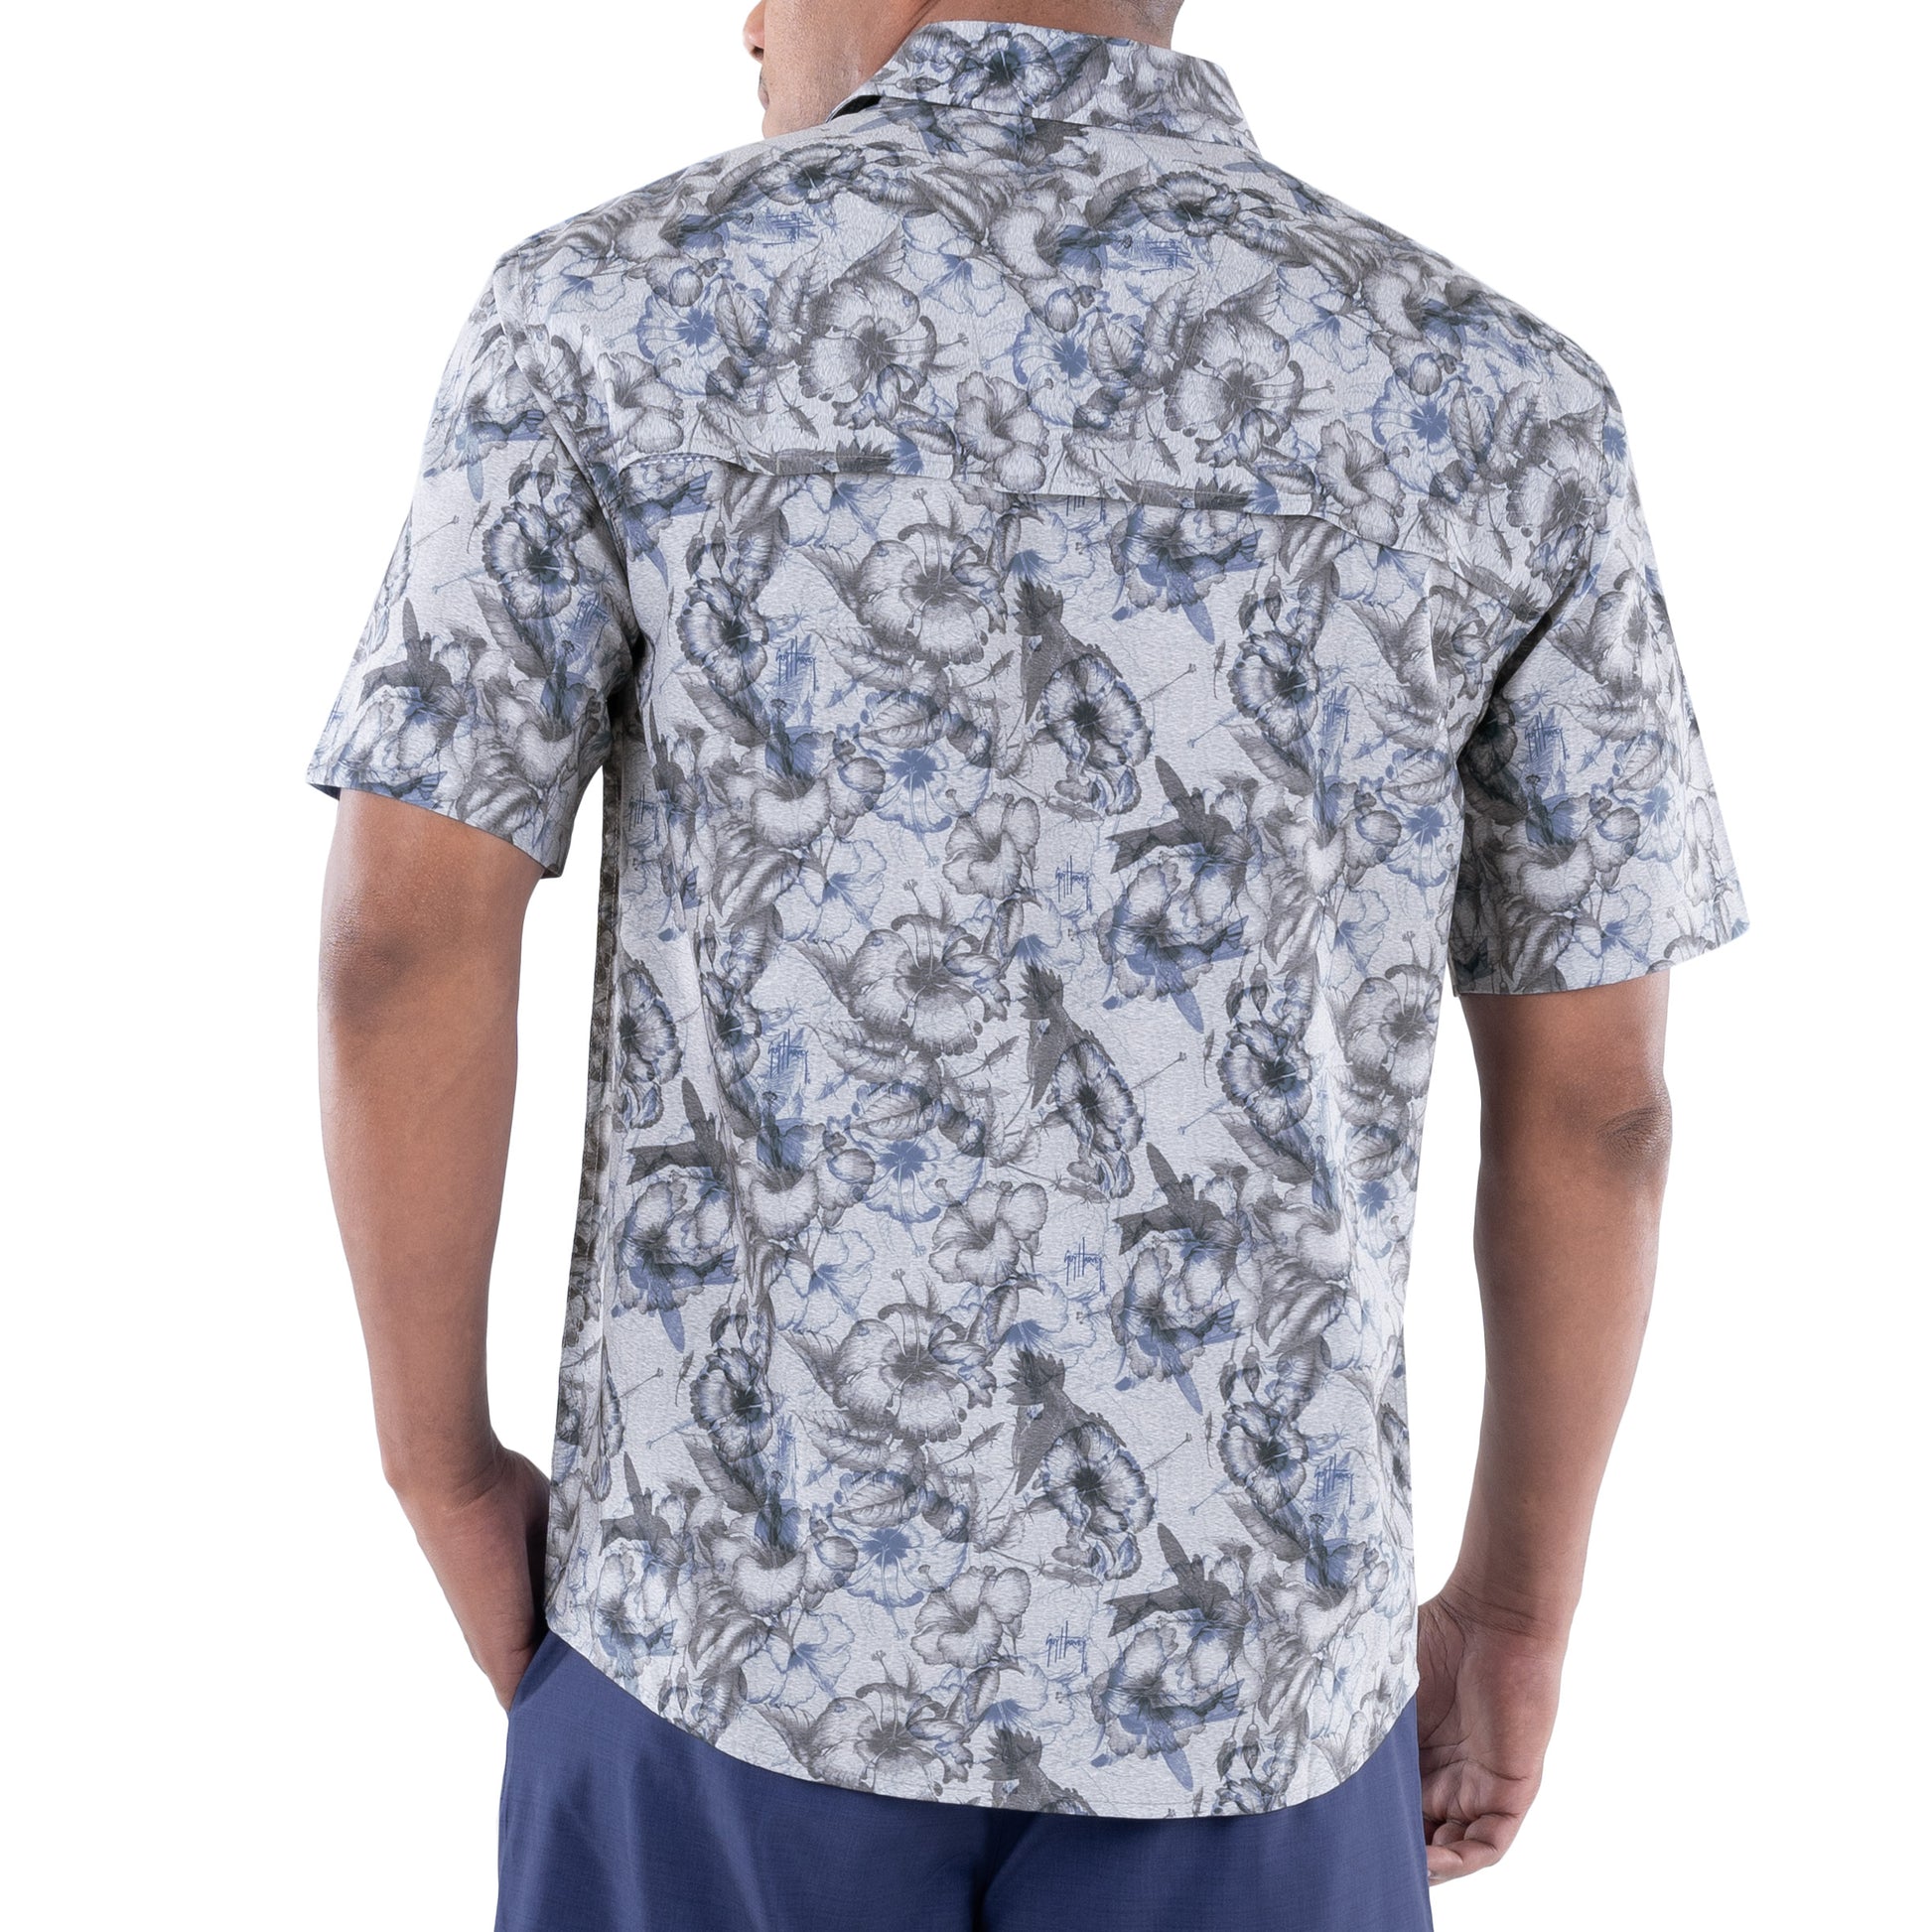 Short Sleeve Fishing Shirt with Printed Hibiscus Pattern in Gray - Back View View 2